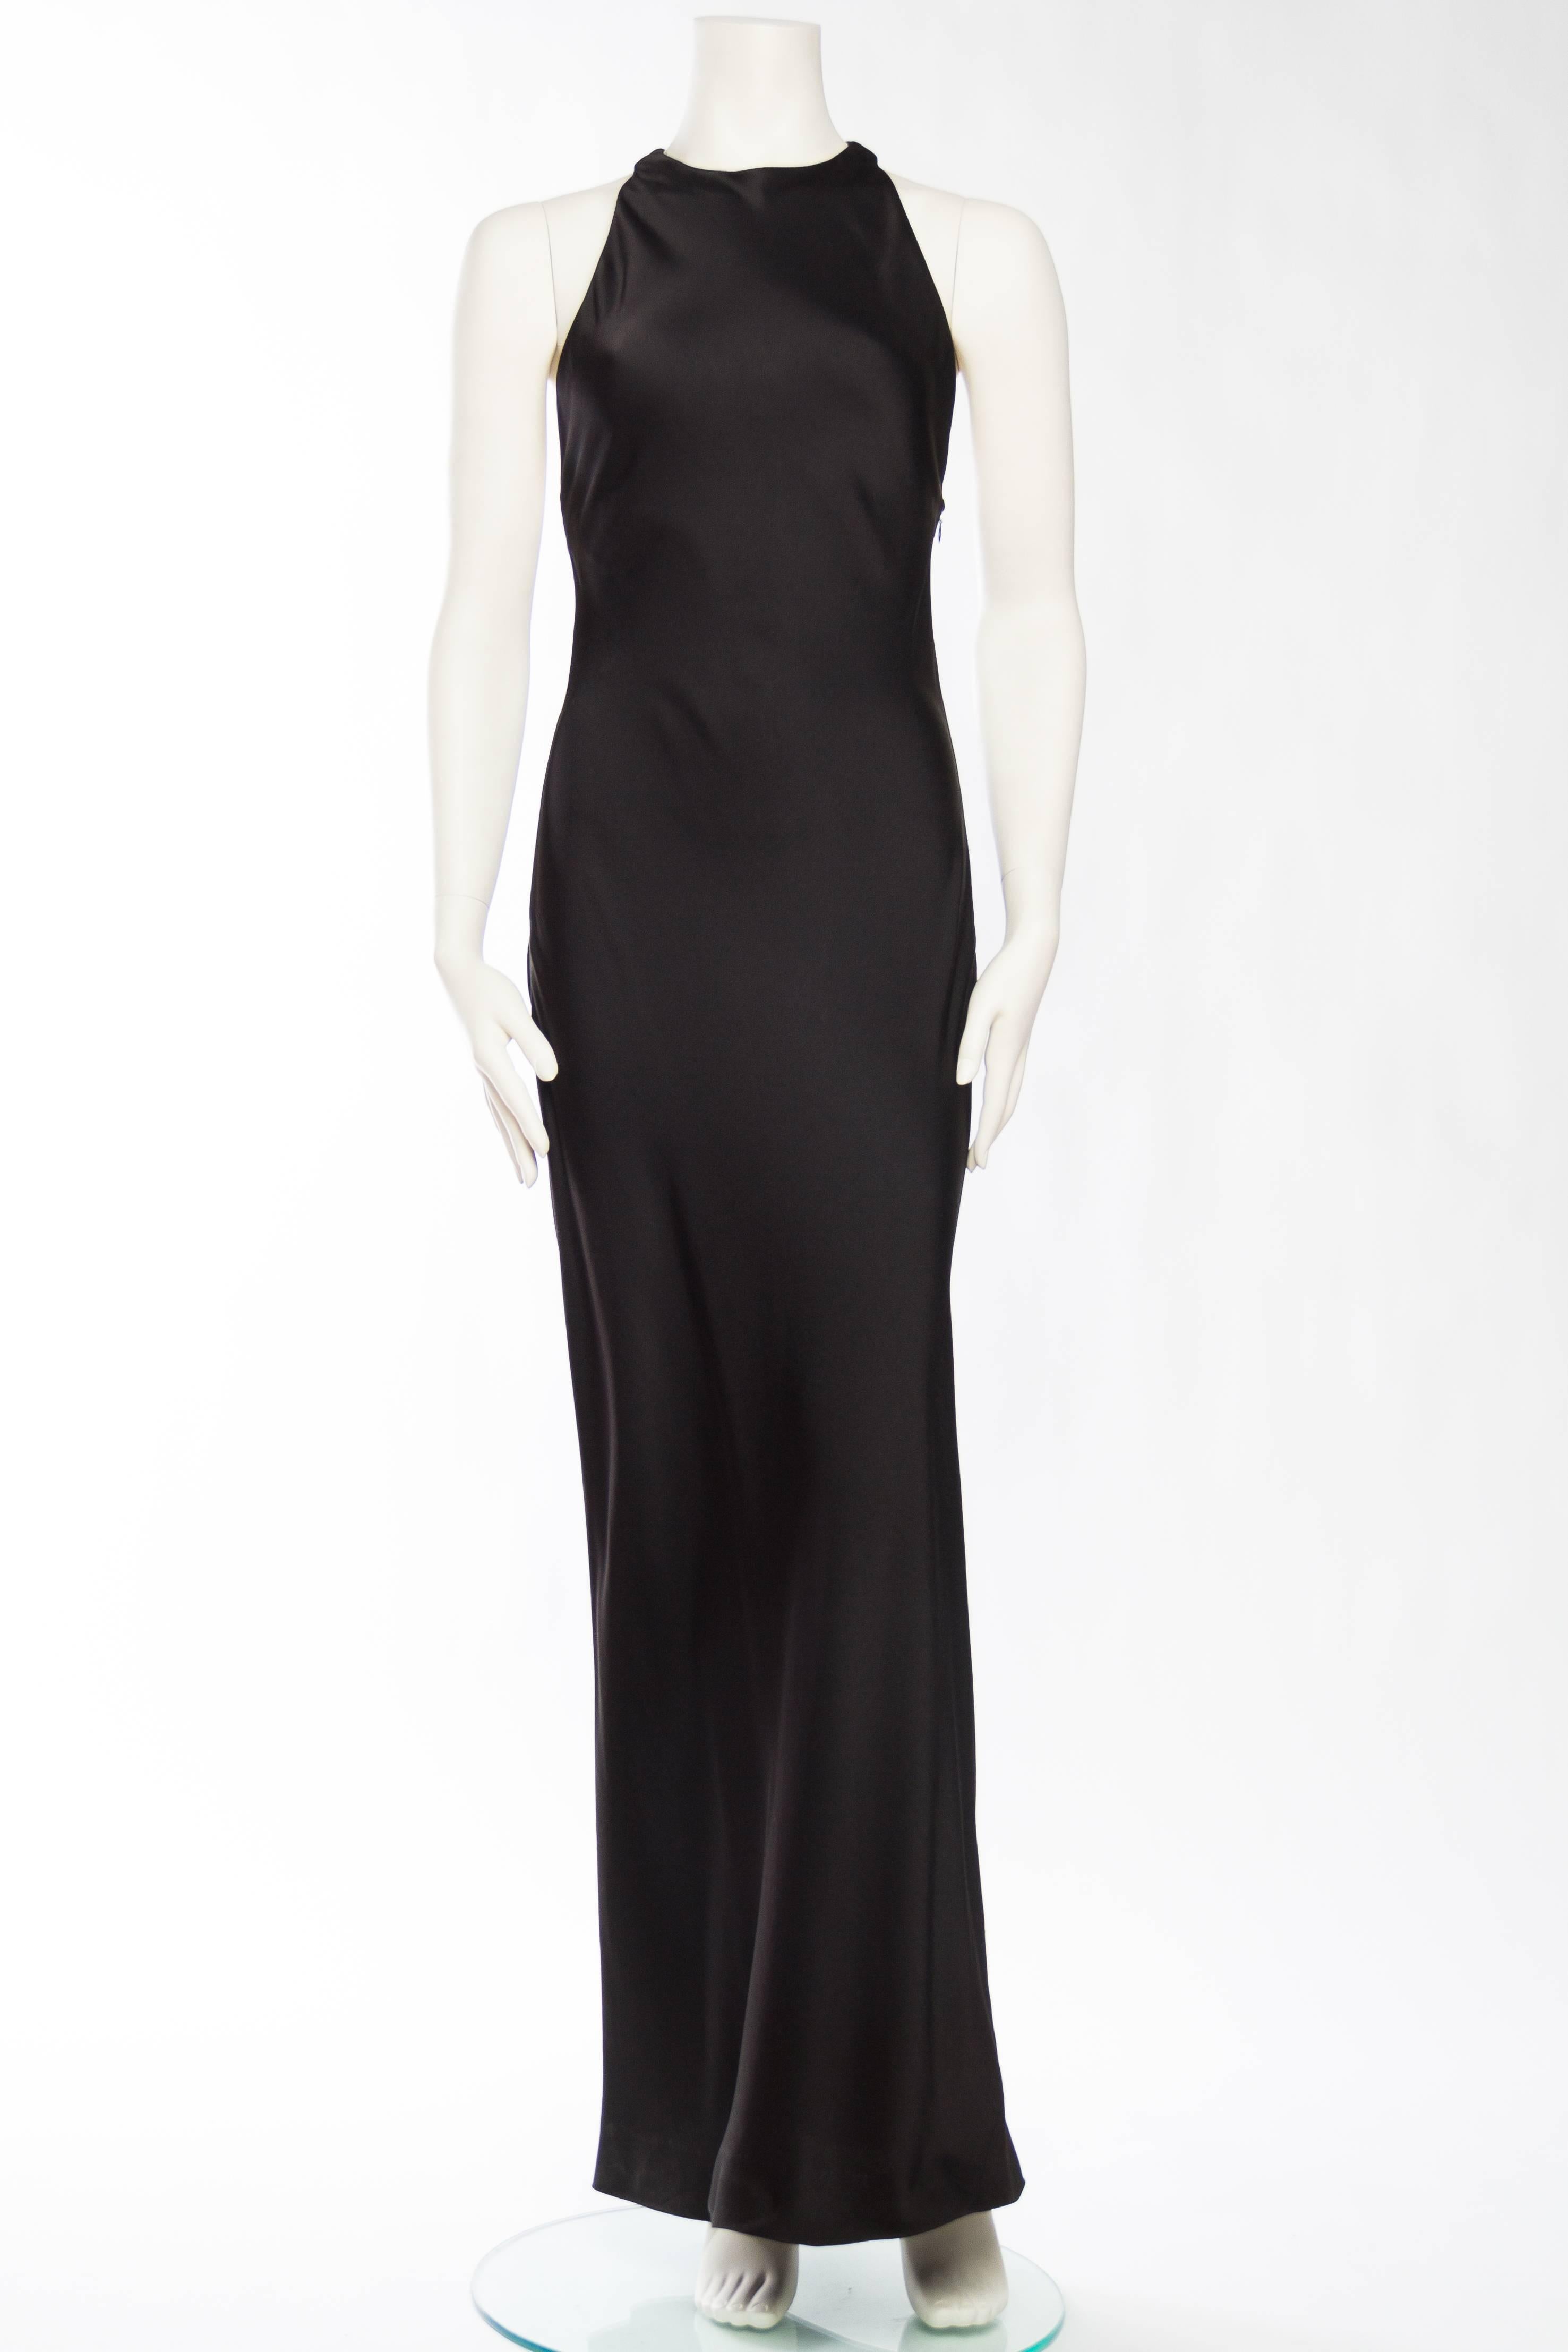 Gorgeous crepe backed satin slinks right down the body in this classic 1930s inspired bias-cut gown from YSL. Tagged a size 36 but being bias cut it can work for smaller sizes. 